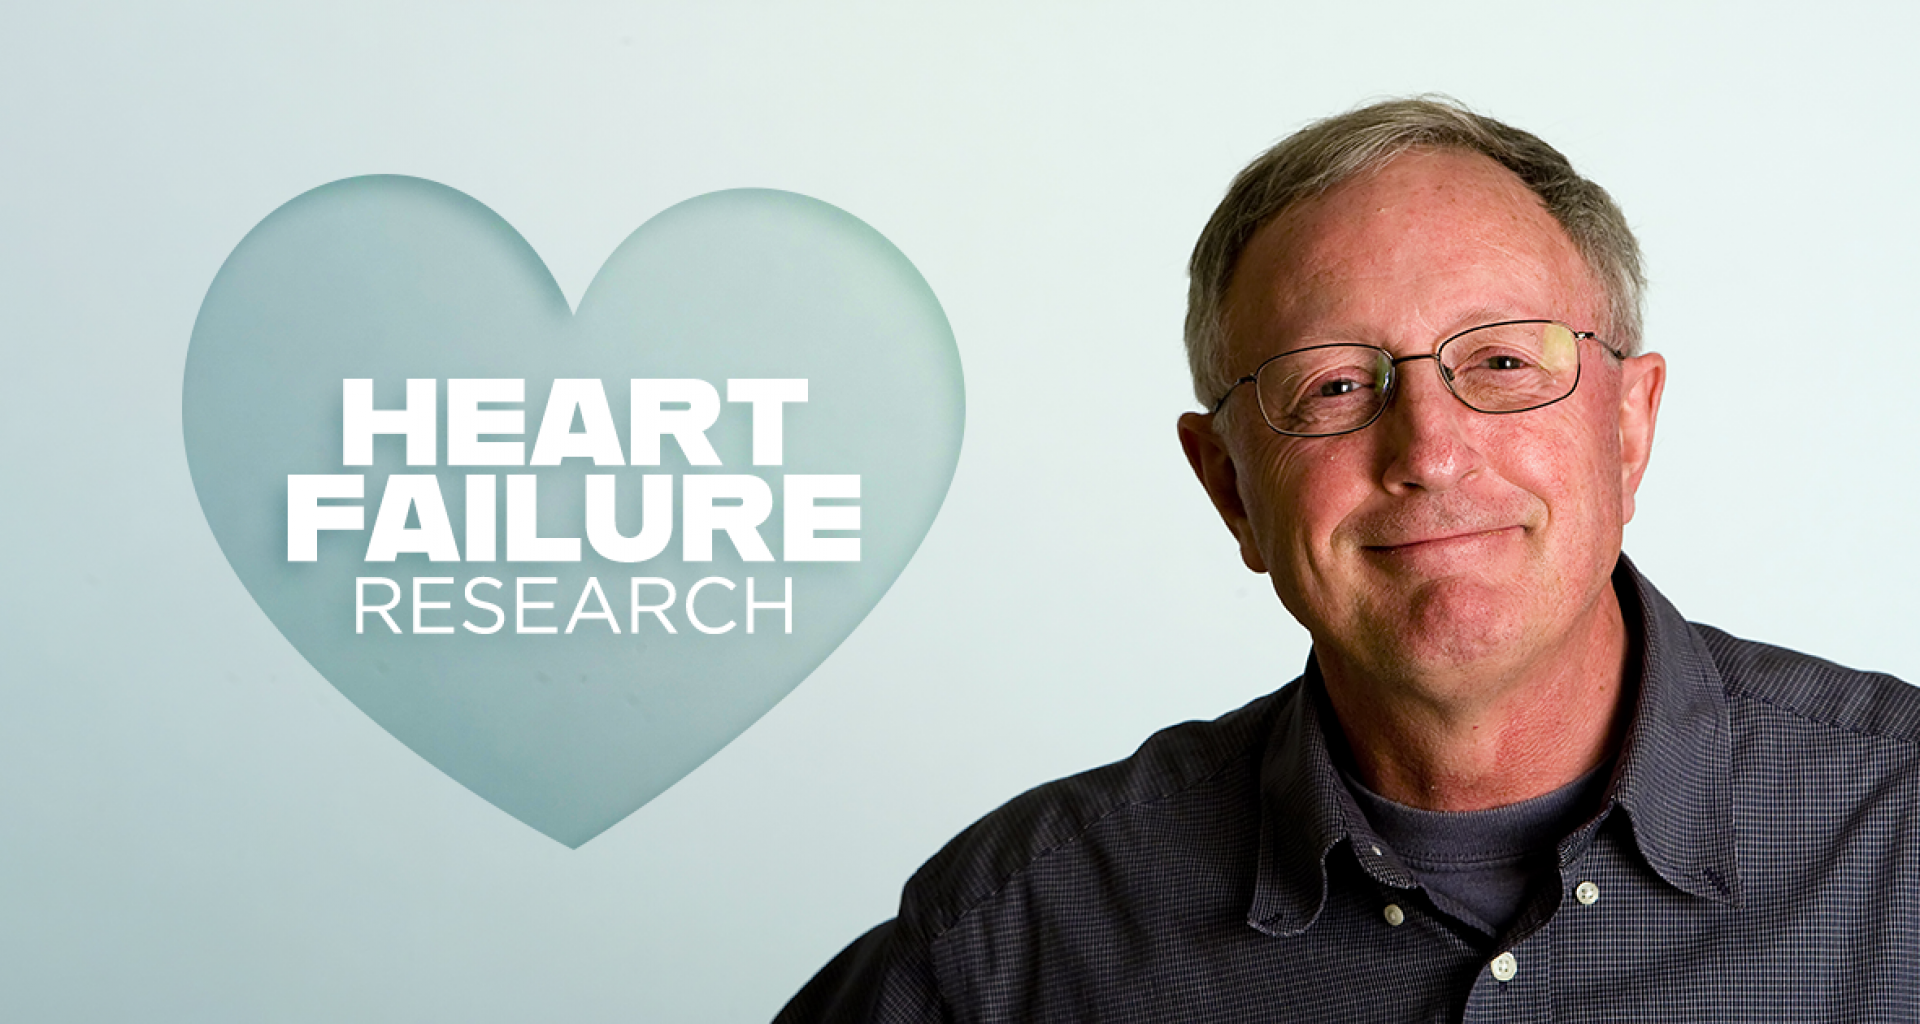 Heart failure research, older Caucasian male with glasses, smiling, heart disease research. 